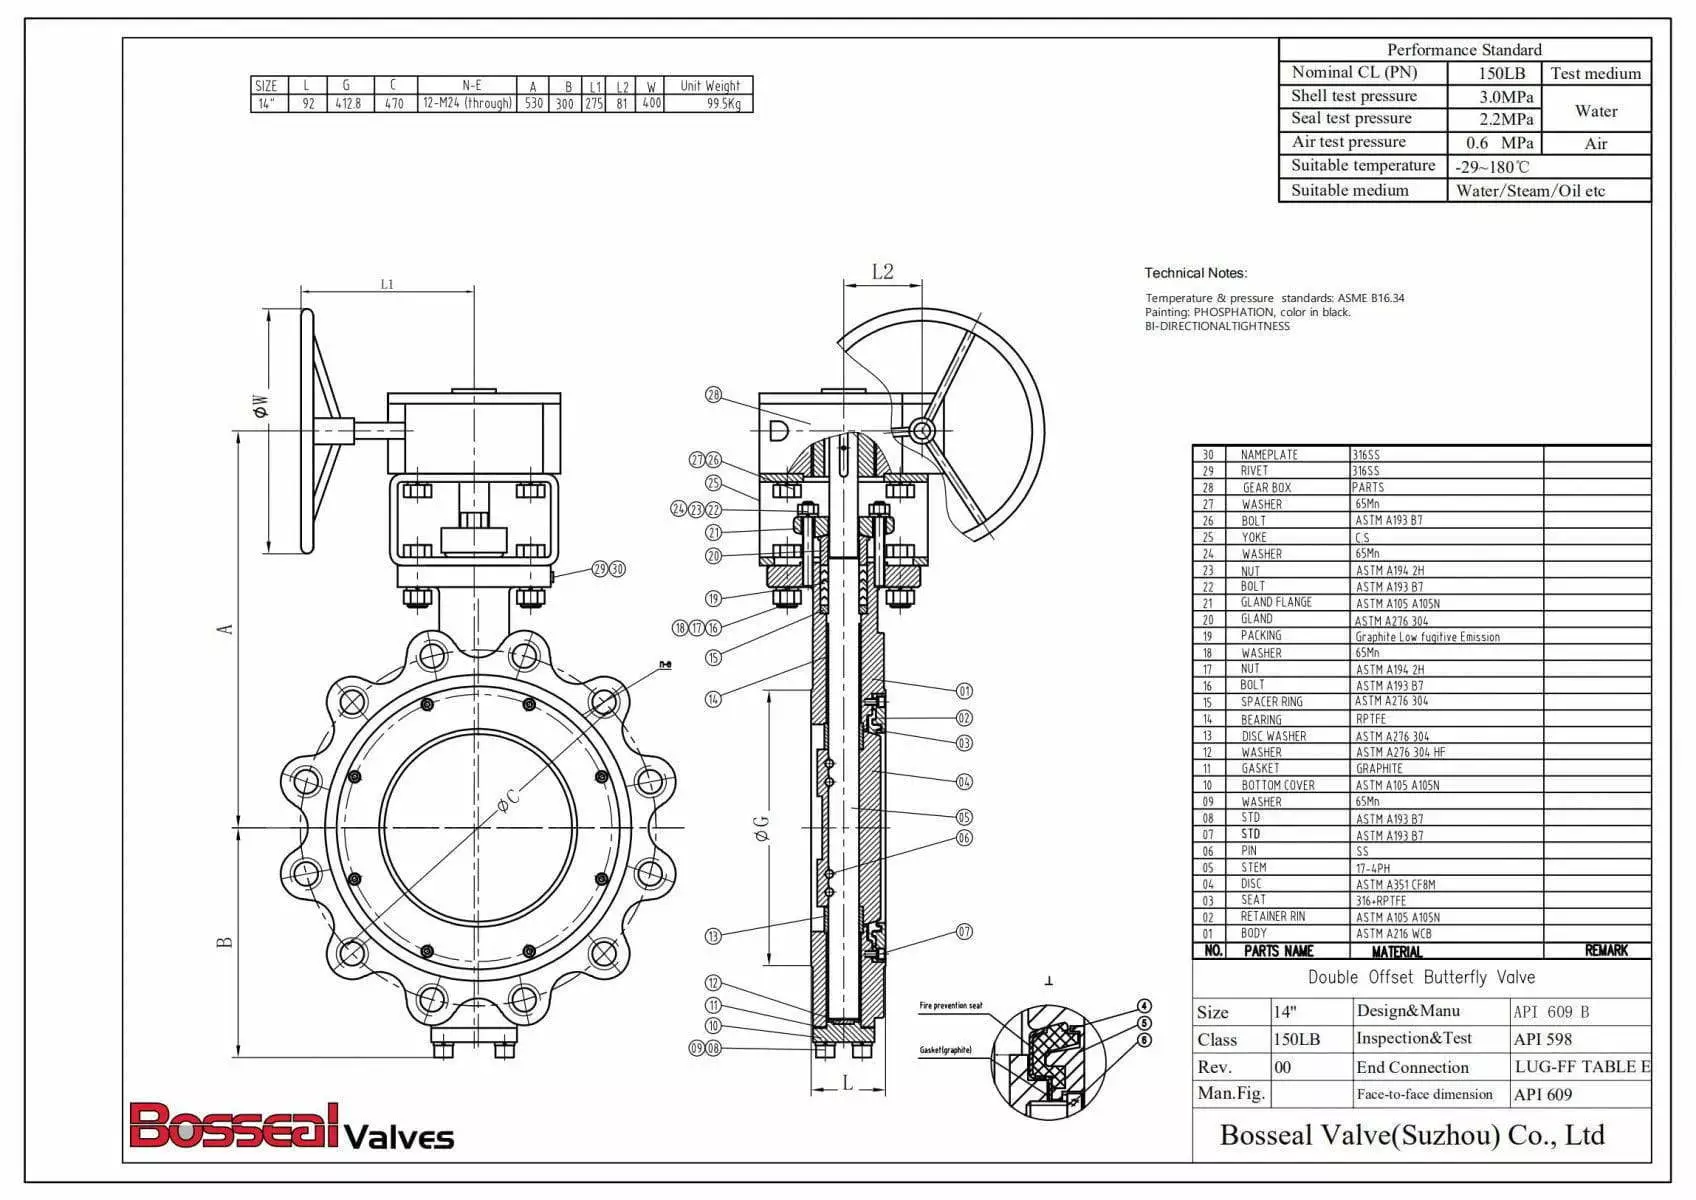 Fire Safe Double Offset Butterfly Valve Tech Drawing